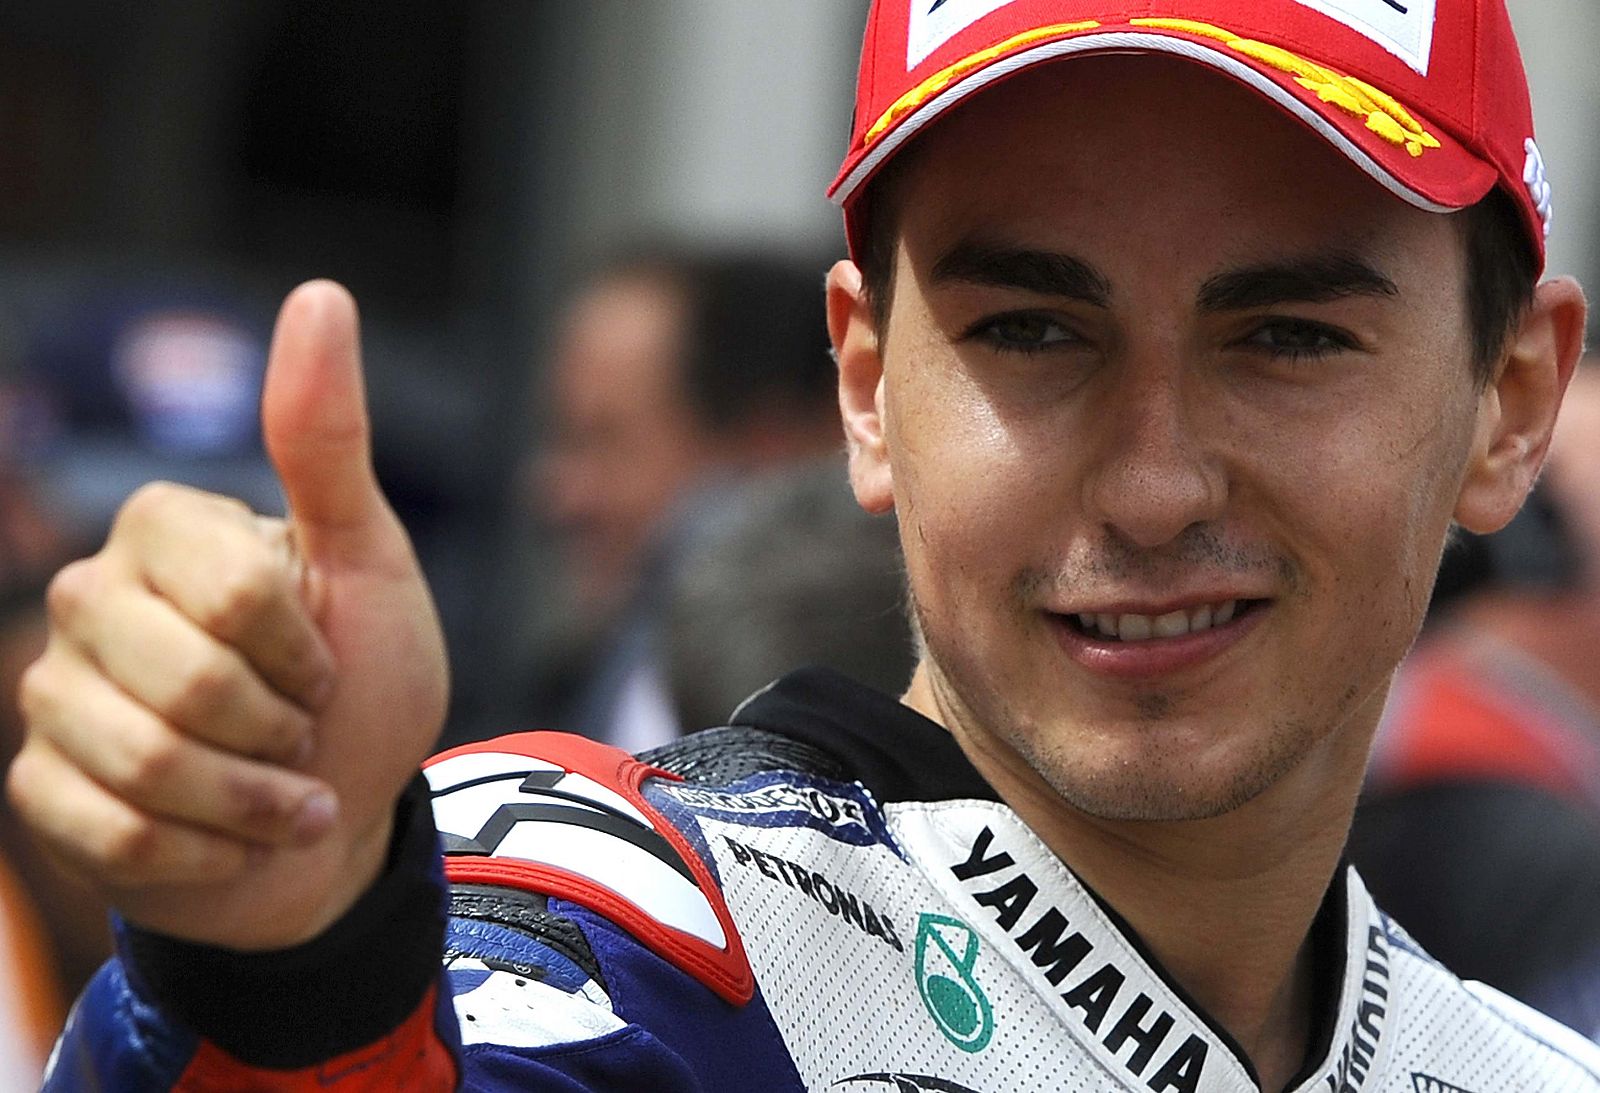 Yamaha MotoGP rider Jorge Lorenzo of Spain gives a thumbs up after placing third at the Aragon Grand Prix at Motorland racetrack in Alcaniz